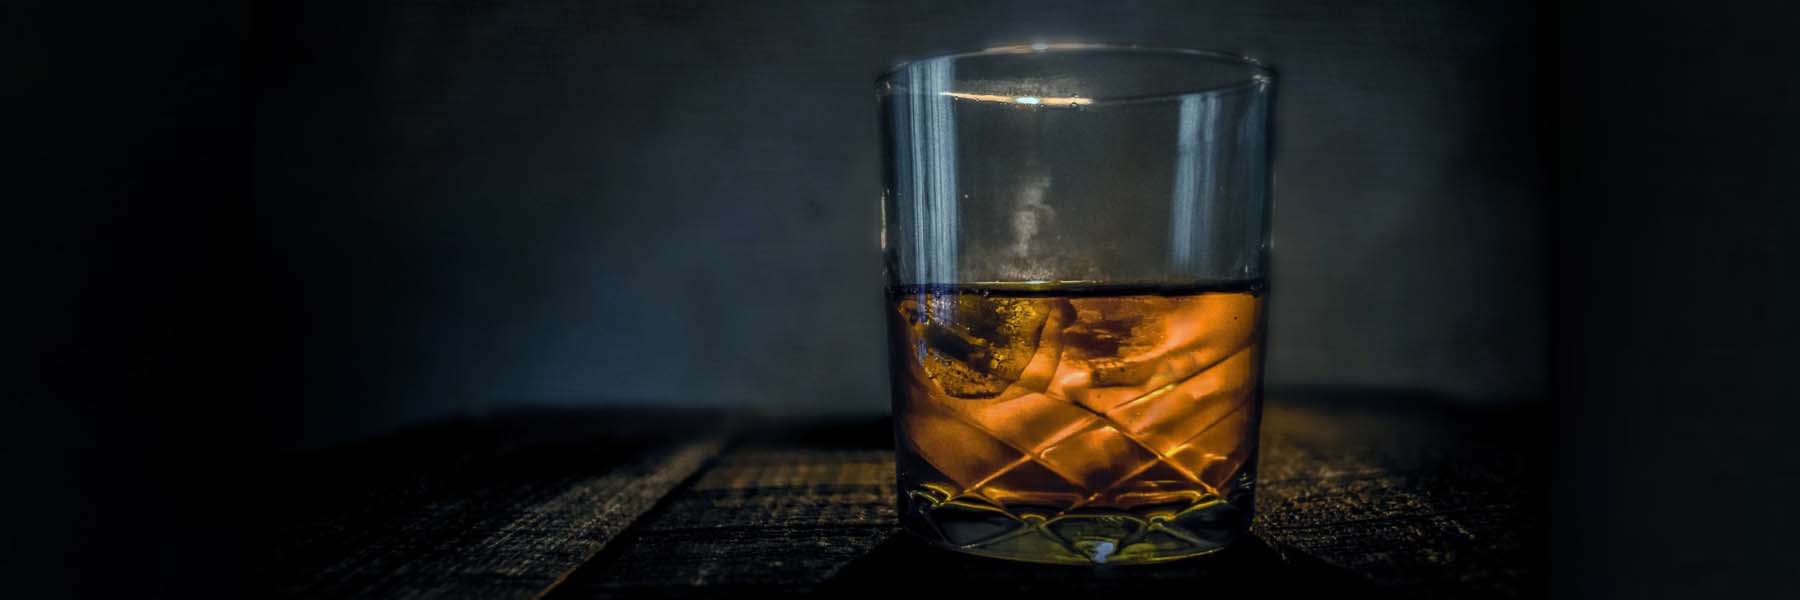 Web3 whisky investments | How will Web3 benefit investing in whisky?